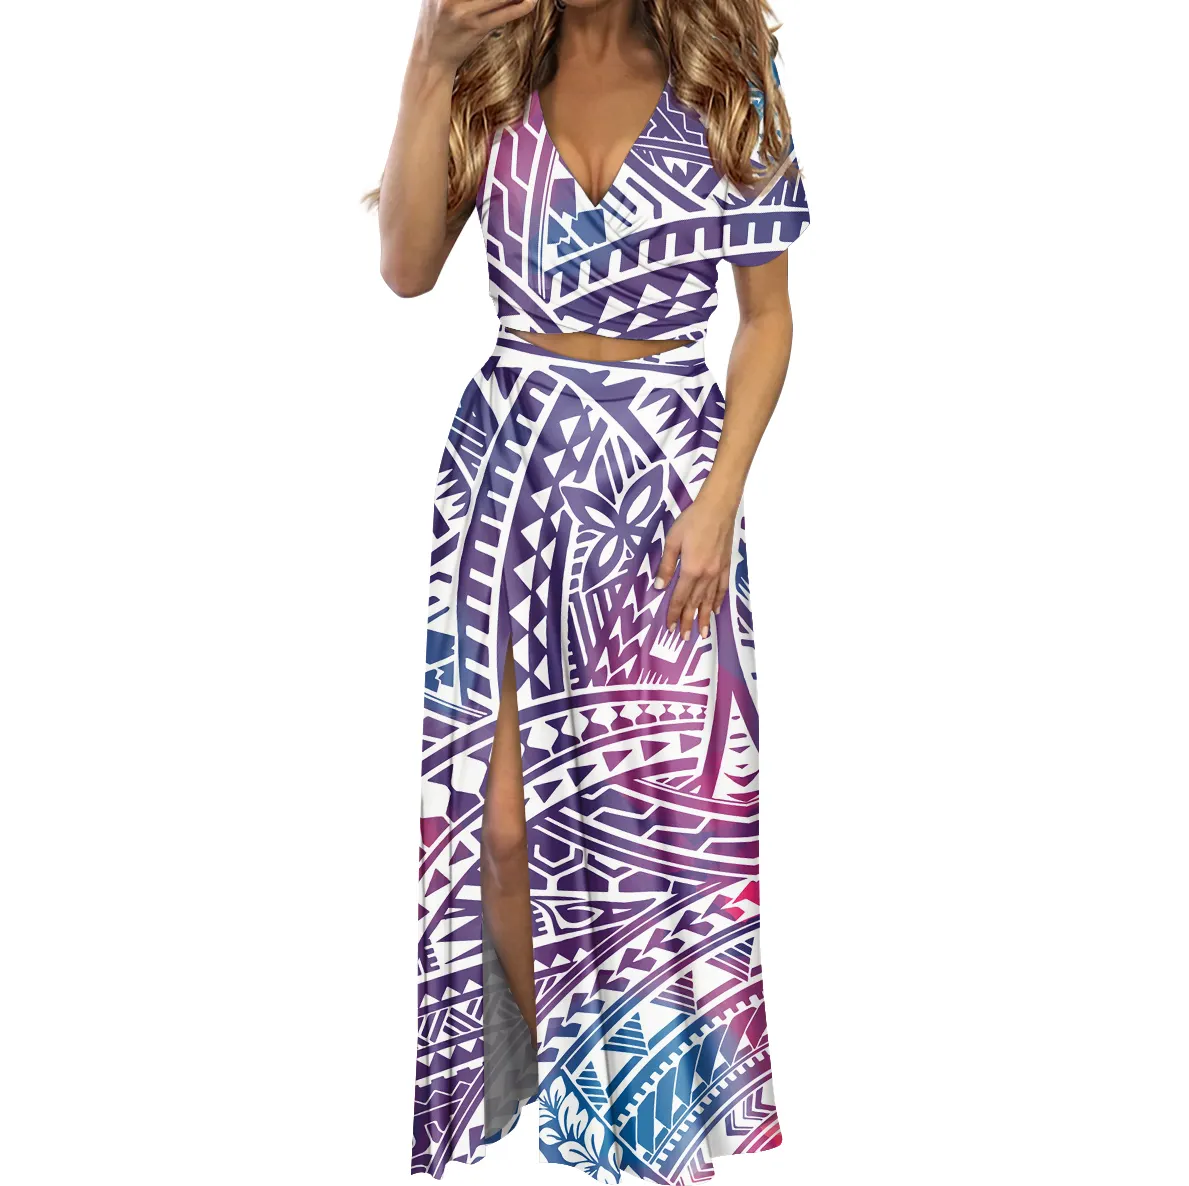 New Design Plus Size Polynesian Style Printed Casual Dresses Suit Maxi Dress Short Sleeve Wholesale Party Wear Dresses For Women